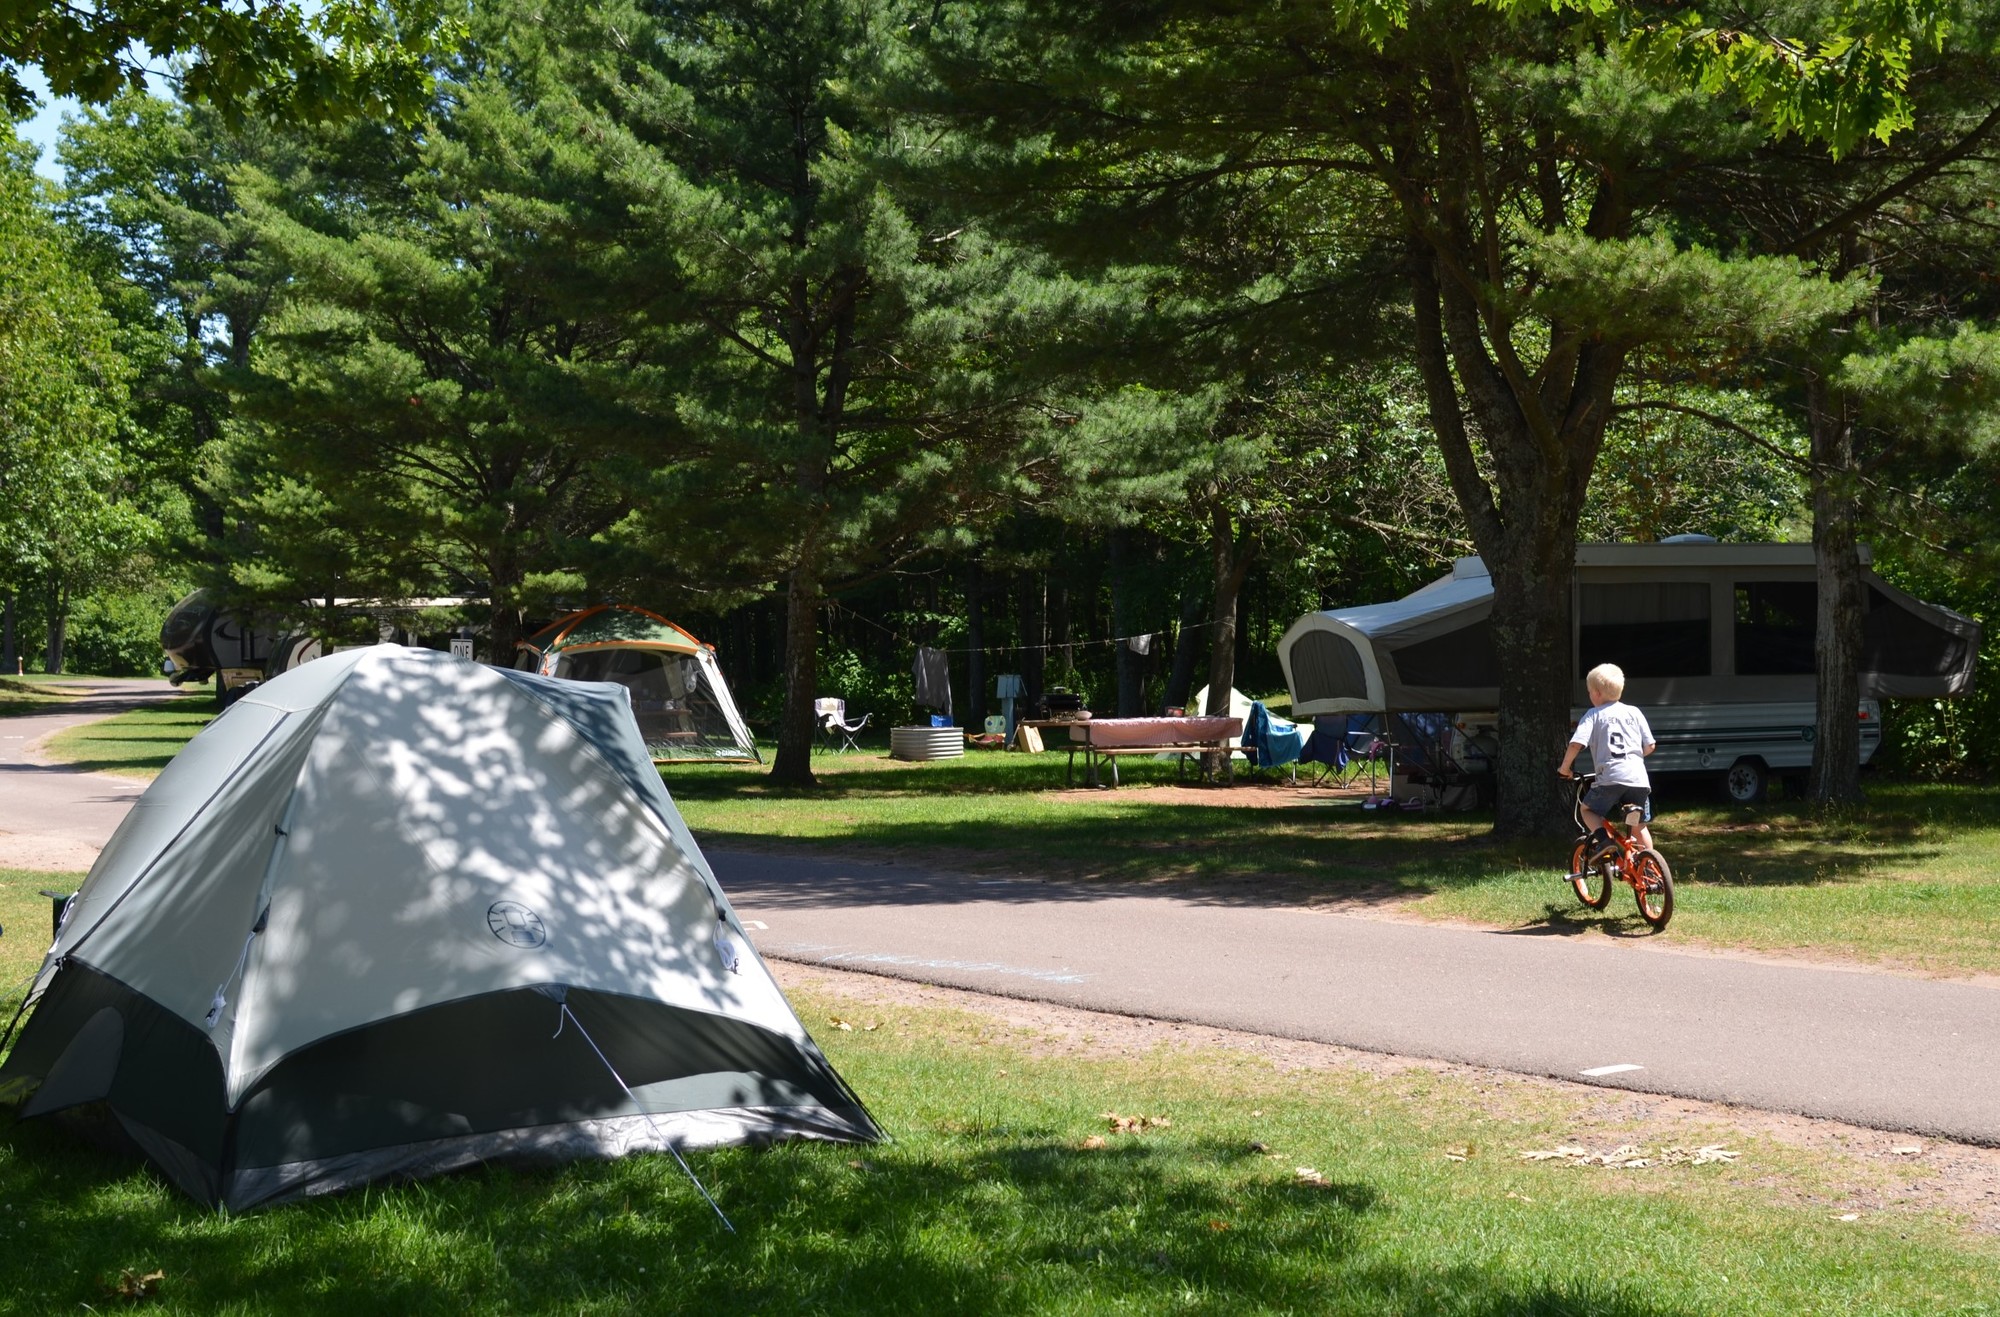 A boy enjoys an afternoon bike ride through the campground at F.J. McLain State Park in Houghton County.